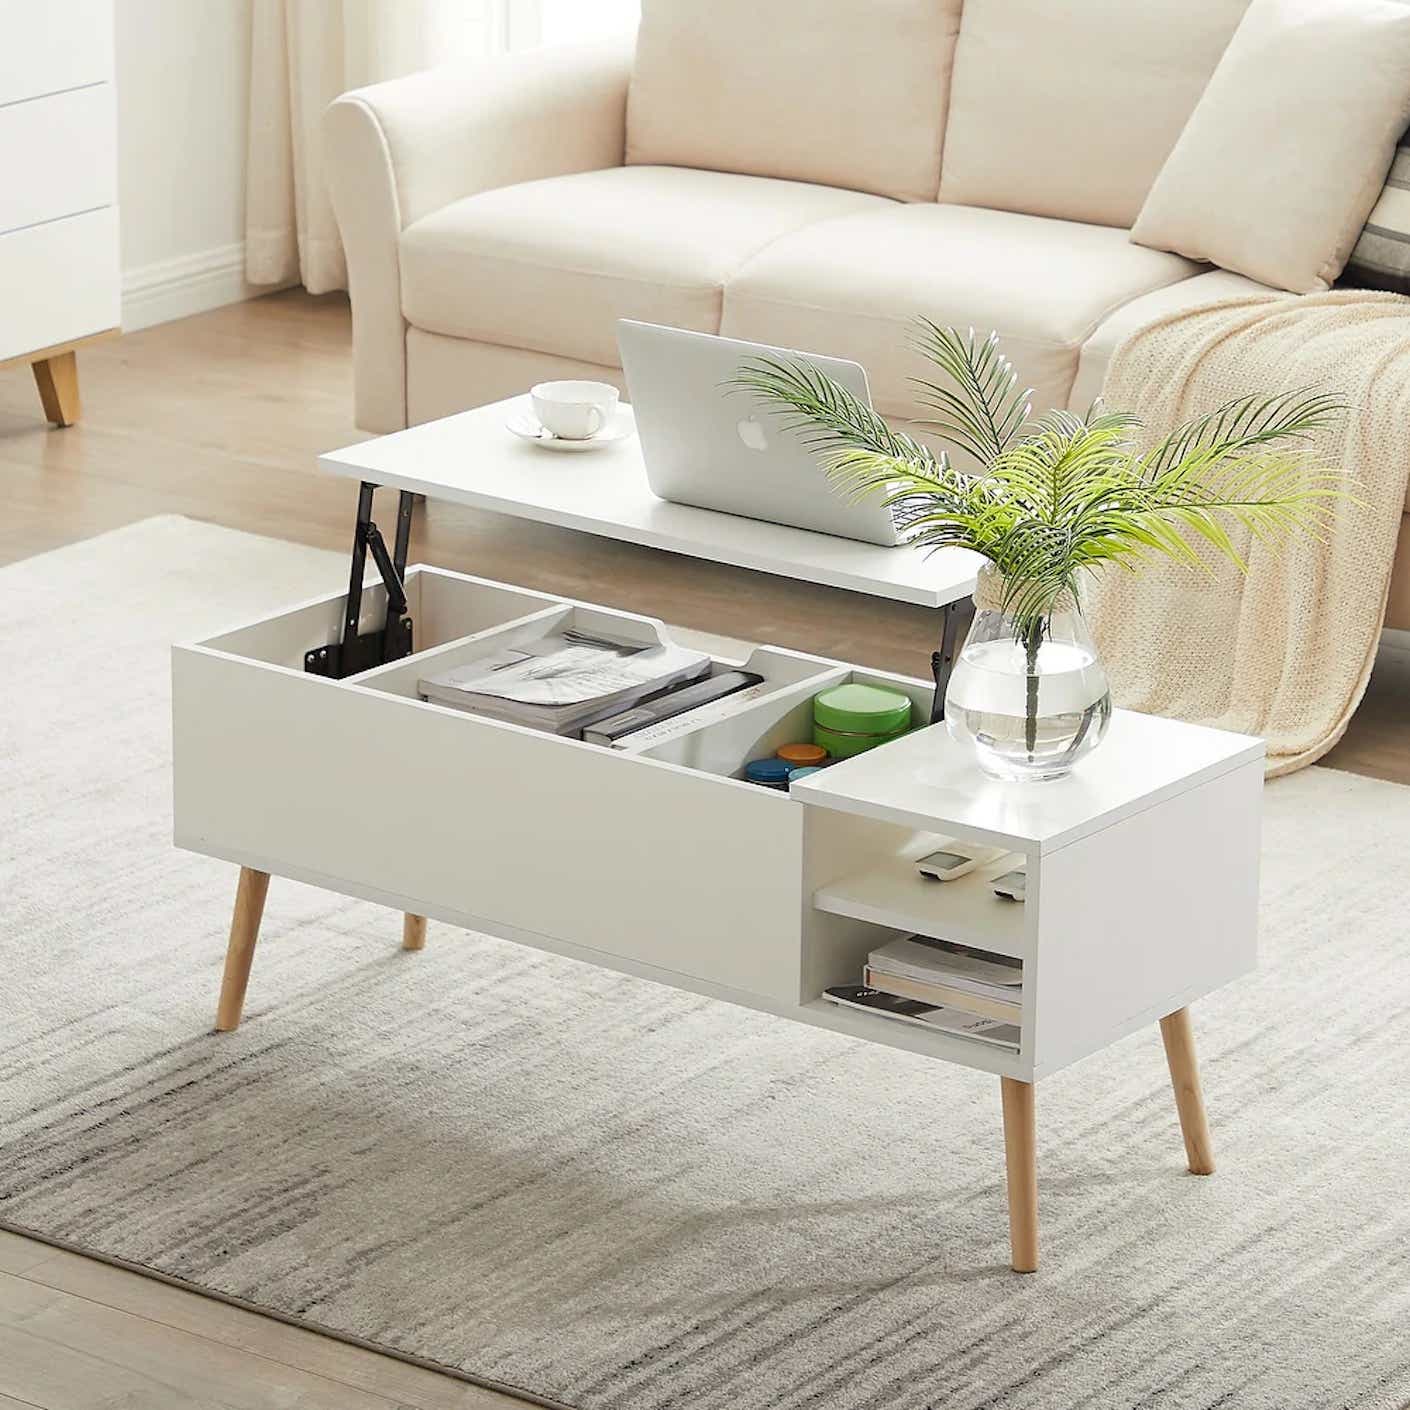 A white storage coffee table with light wooden legs sits open to show off inner compartments and shelves.